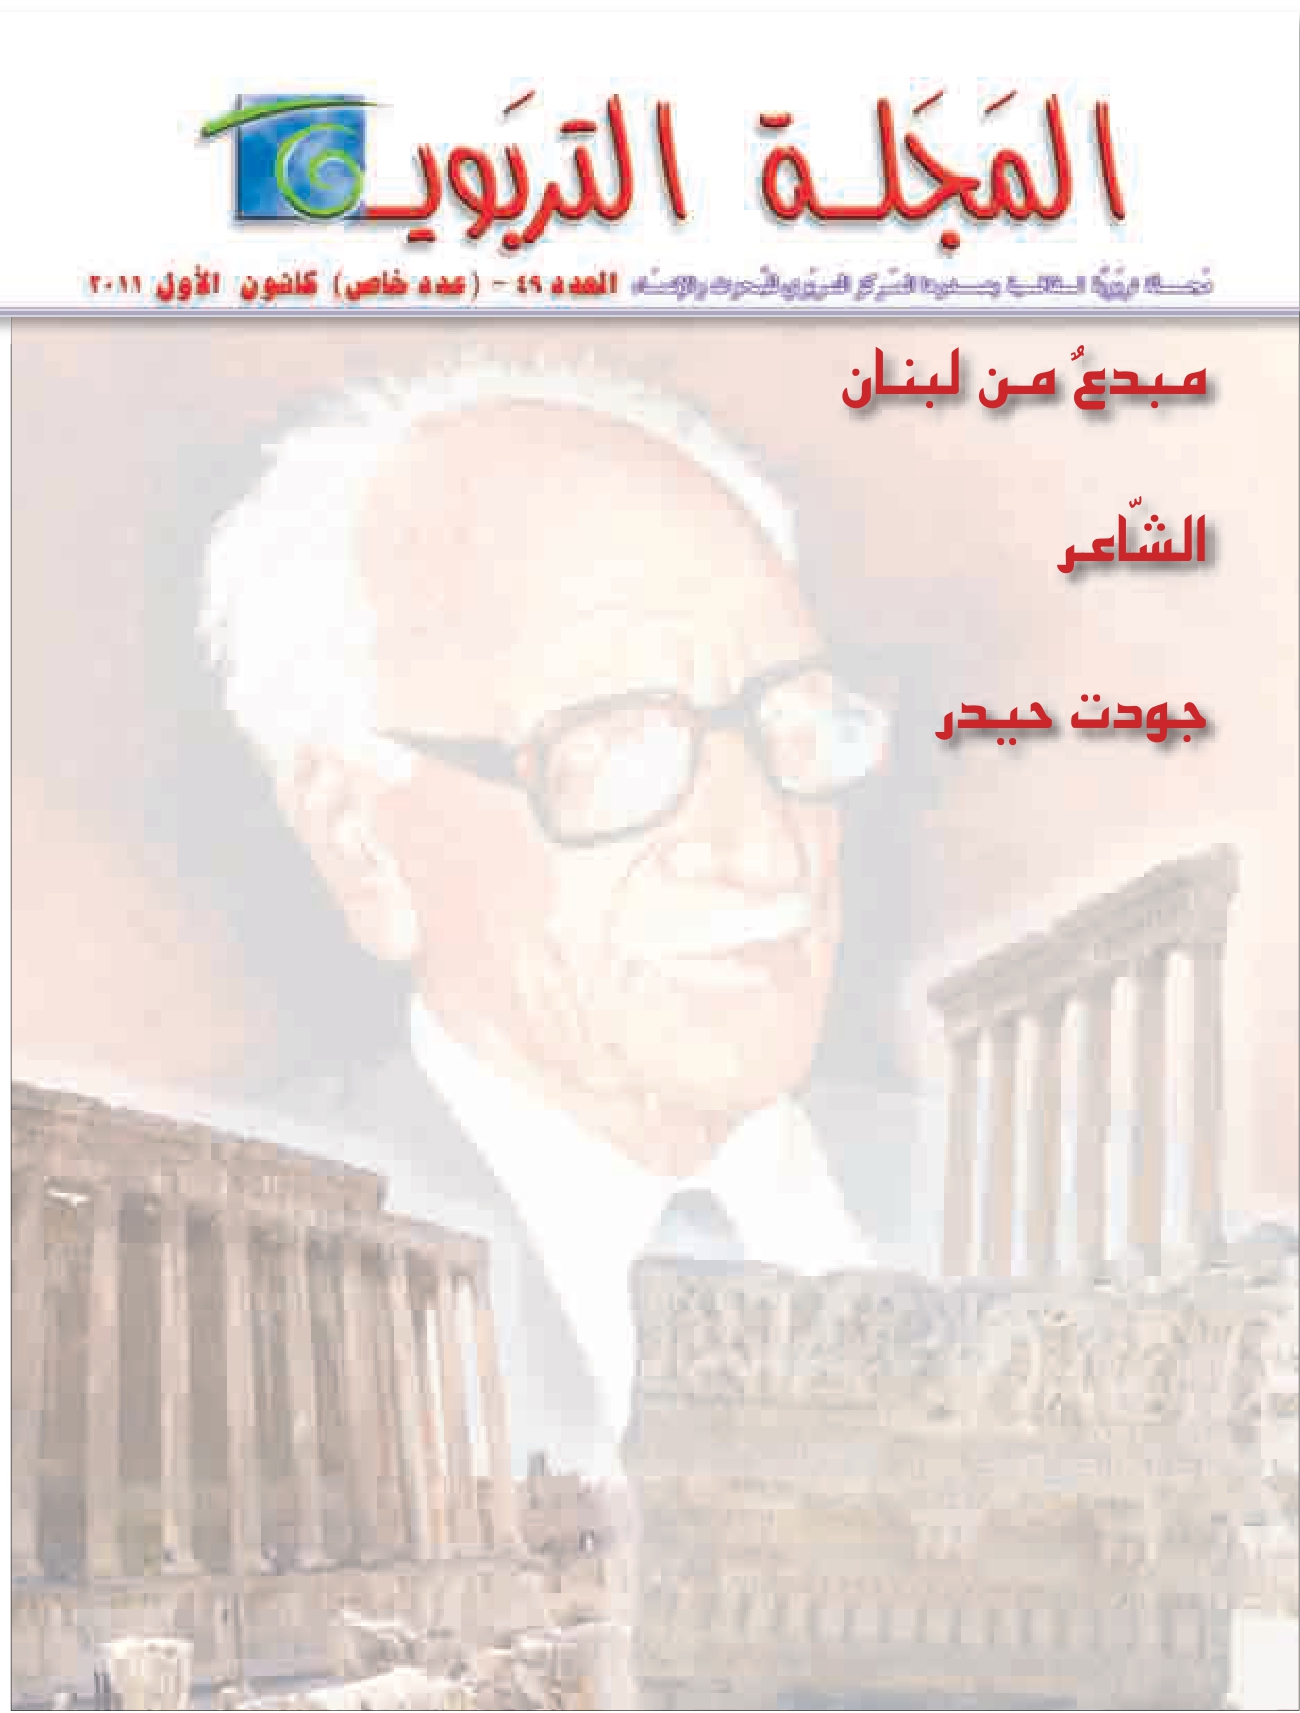 "The Poet Jawdat Haydar: An Outstanding Talent From Lebanon", The Educational Magazine, Special Issue, Dec 2011.